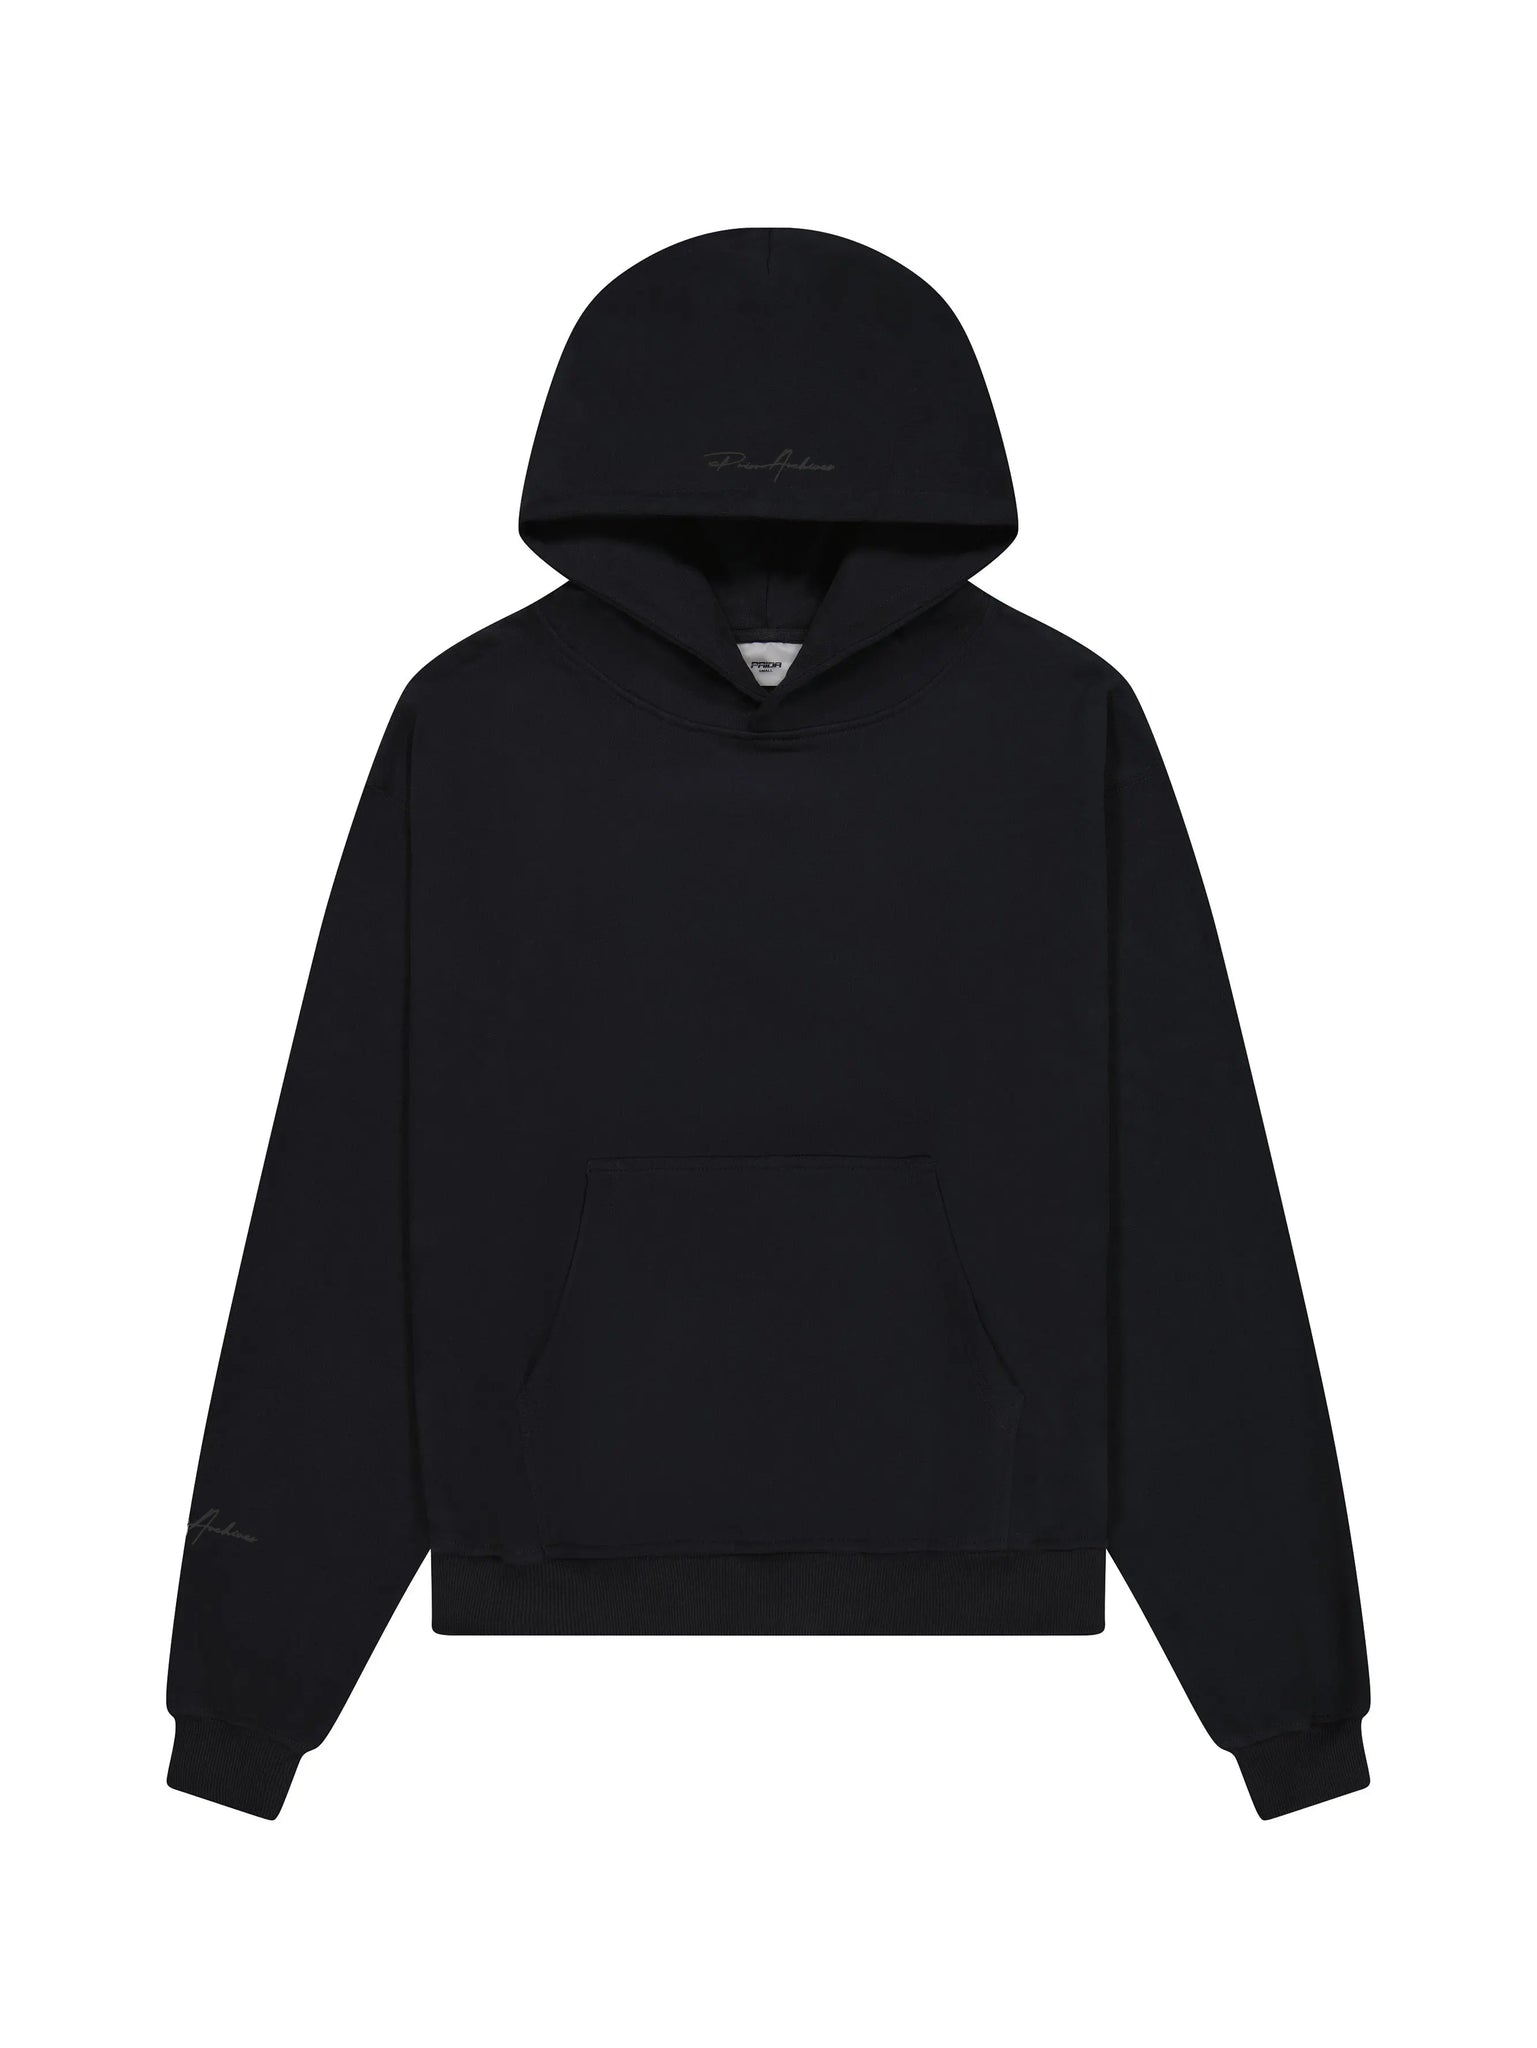 Prior Black Collection Embroidery Logo Oversized Hoodie Onyx in Melbourne, Australia - Prior